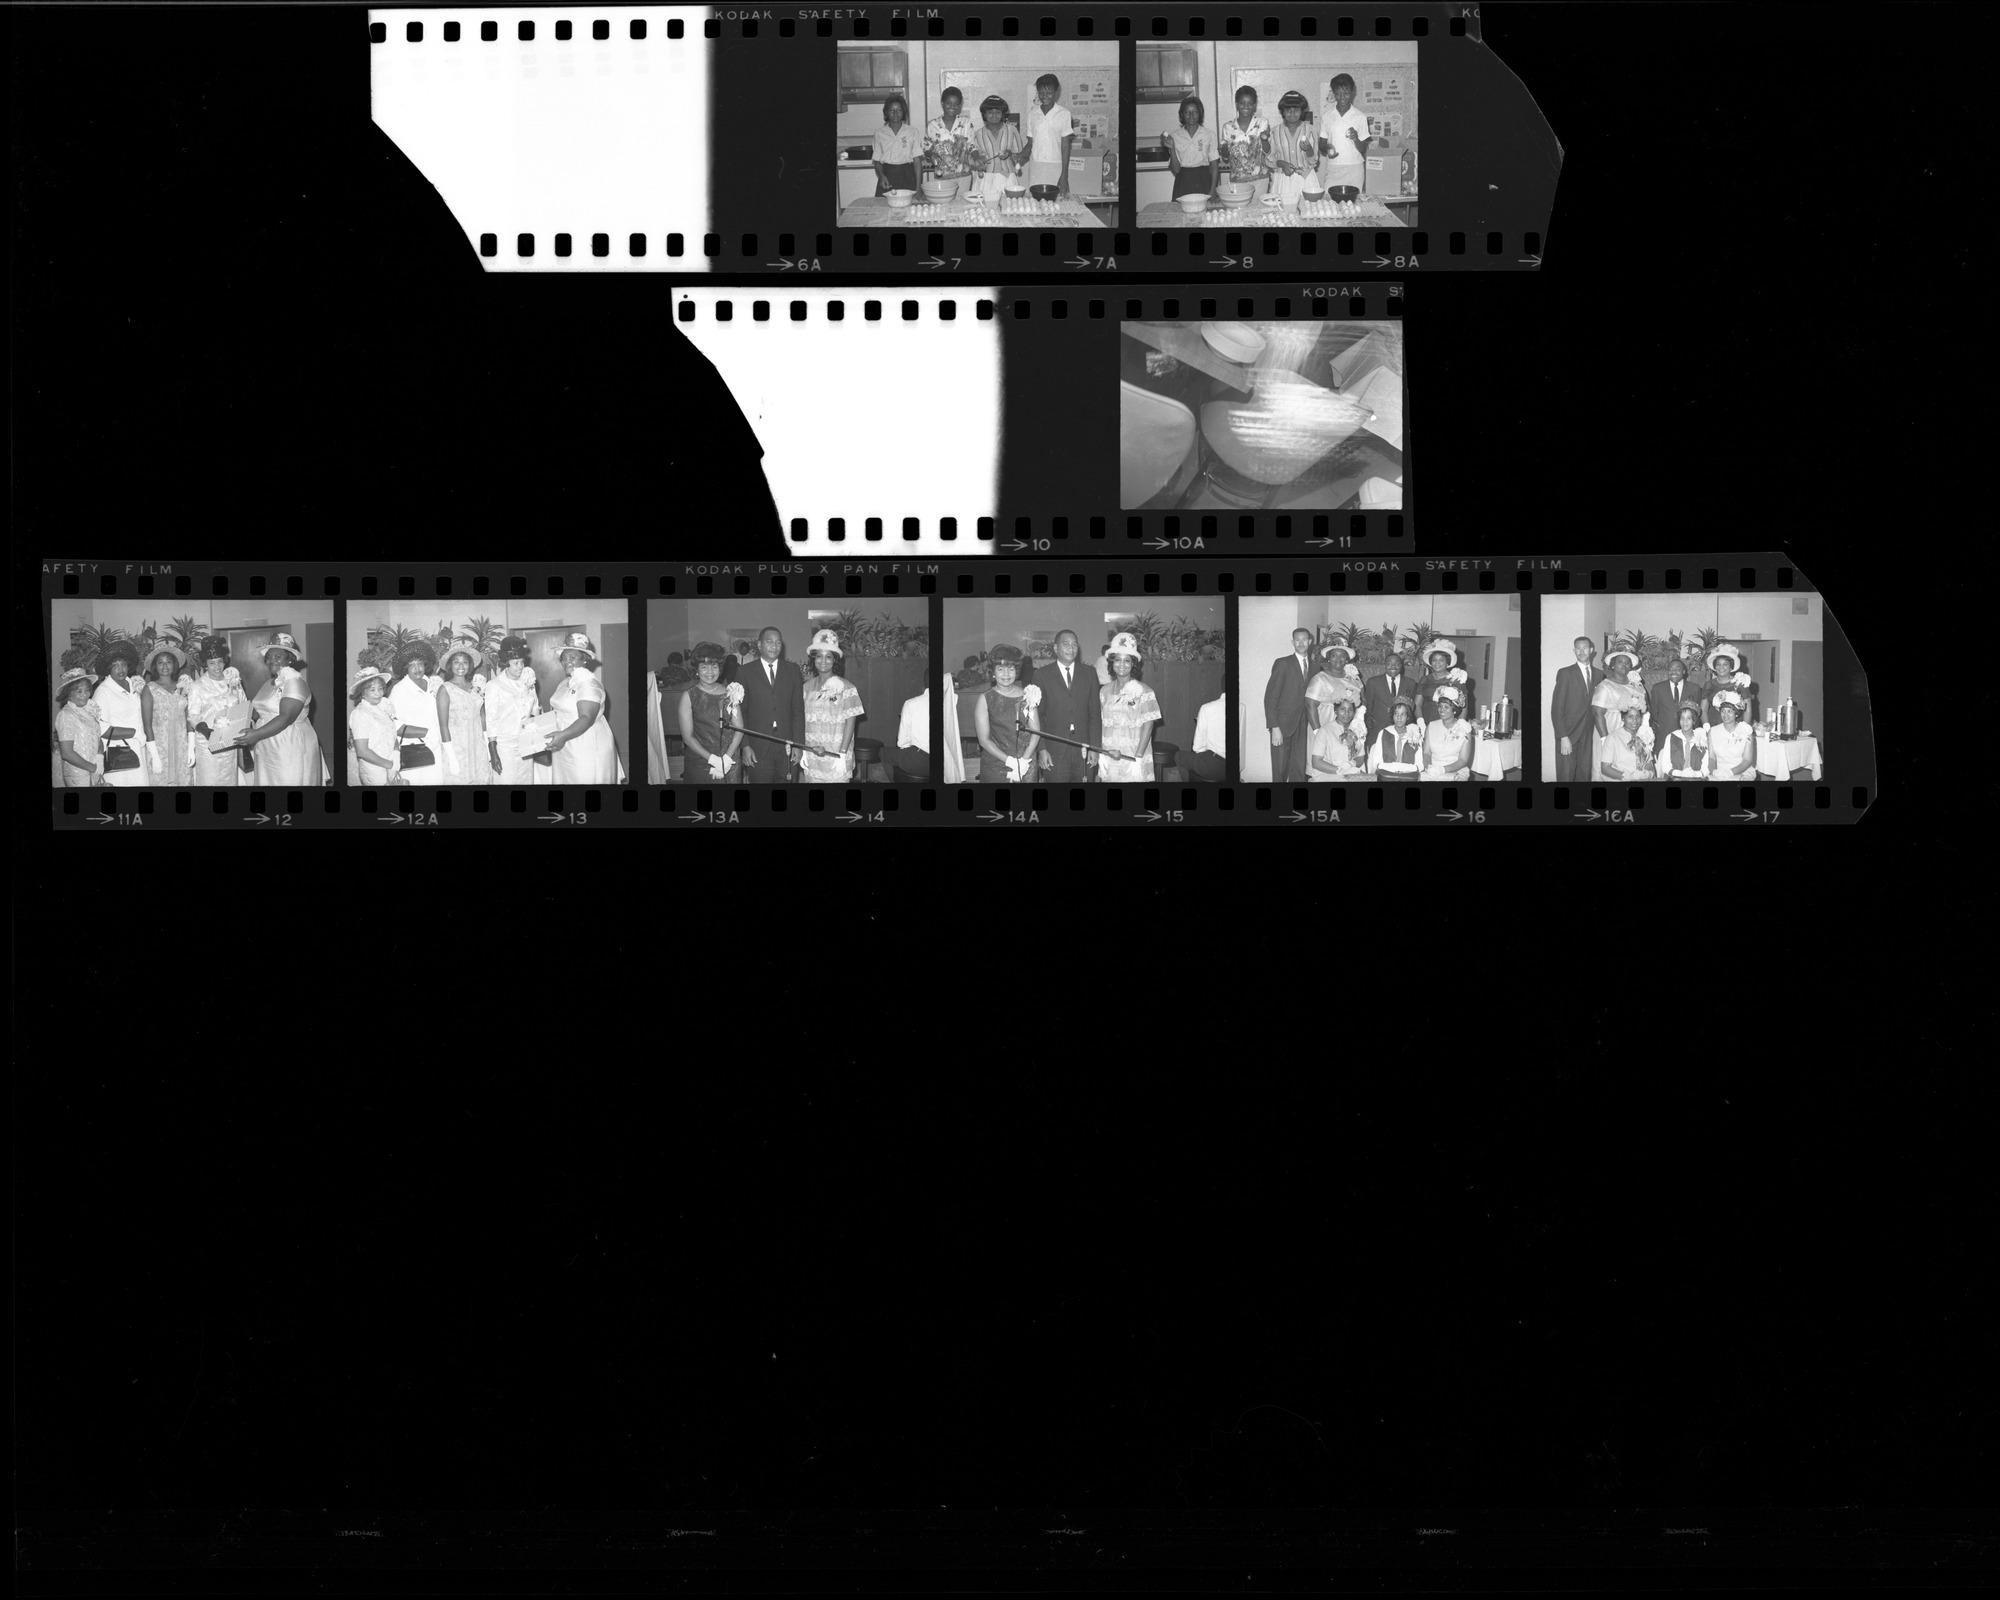 Set of negatives by Clinton Wright including Easter Parade at Rubens, L.T. Mason at Doolittle and Malvern, bunny hop at El Morocco, Mr. and Mrs. Simmons at 308 Jackson, and girls dying eggs at Doolittle, 1965, page 3